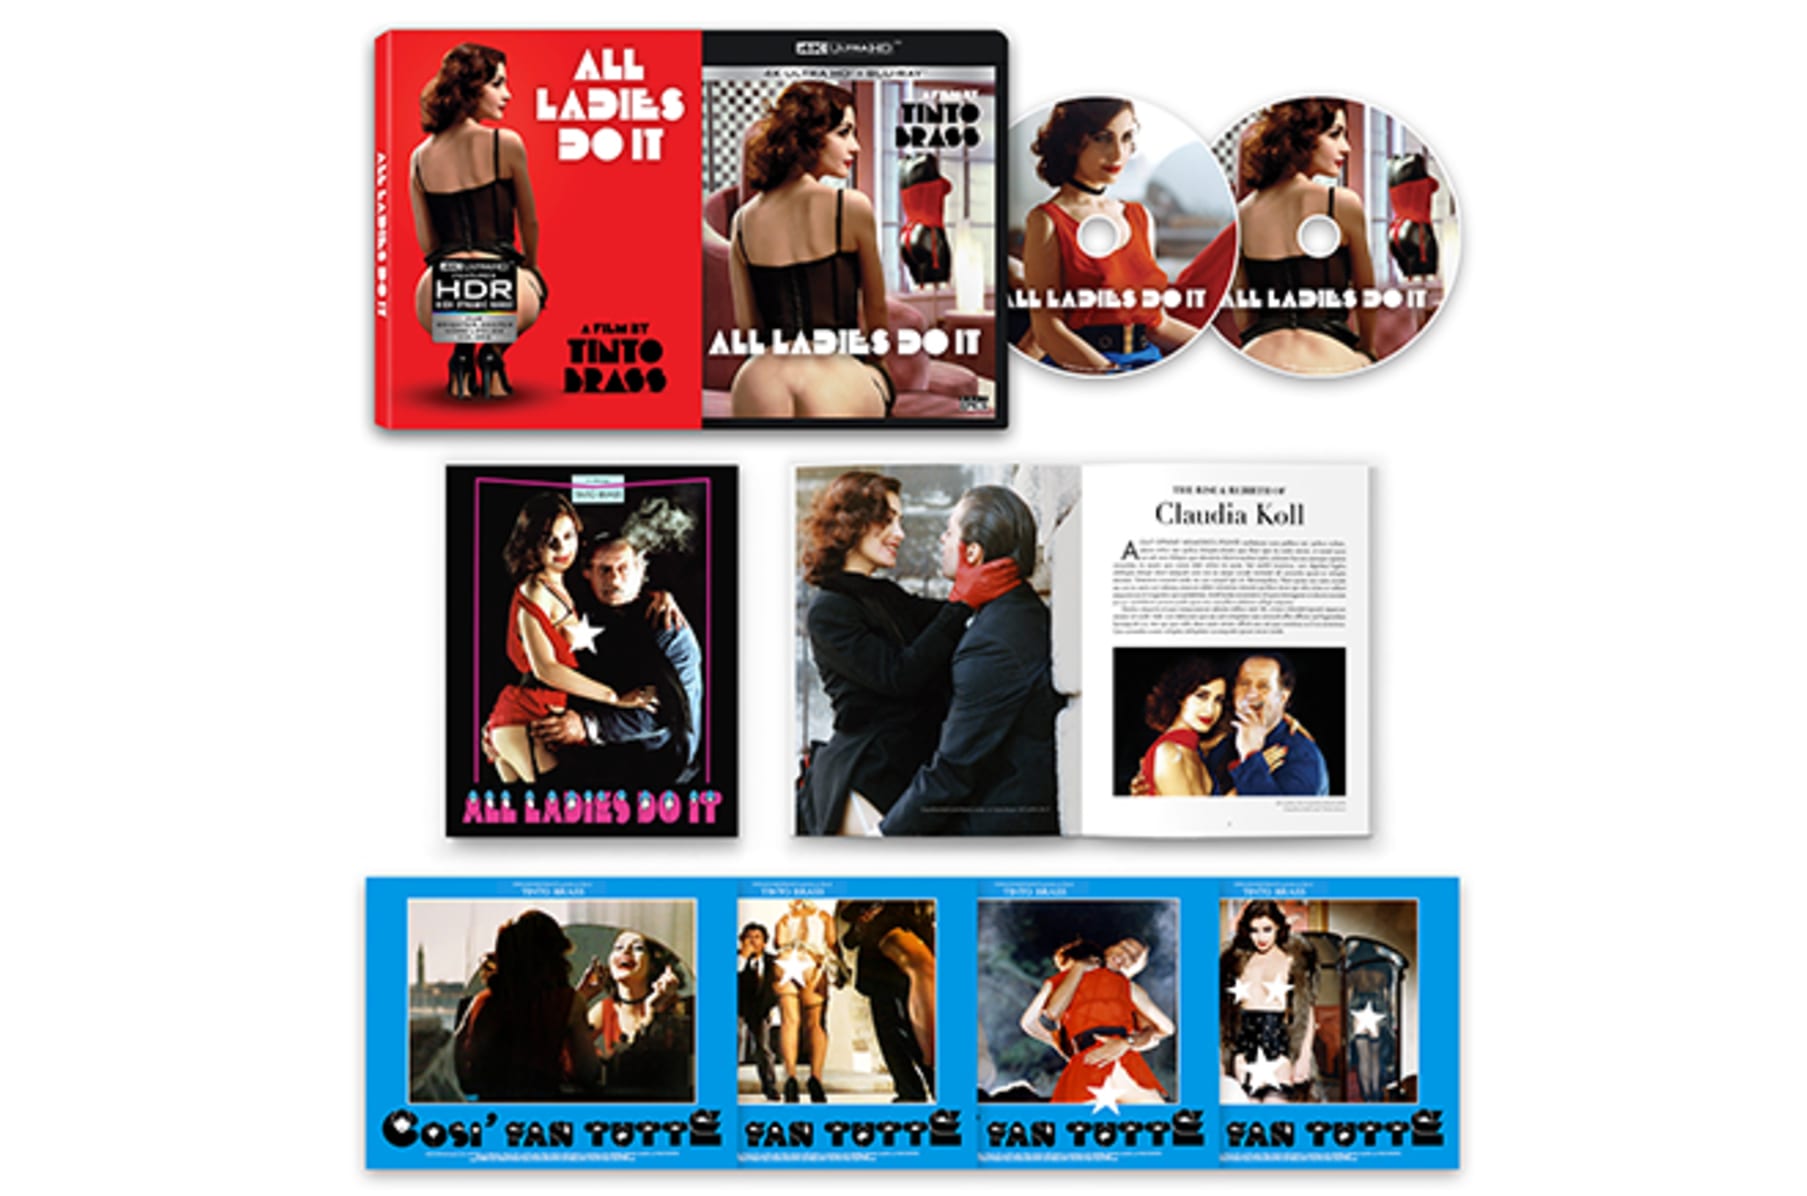 The Films of Tinto Brass HC Book and 4K UHD Indiegogo